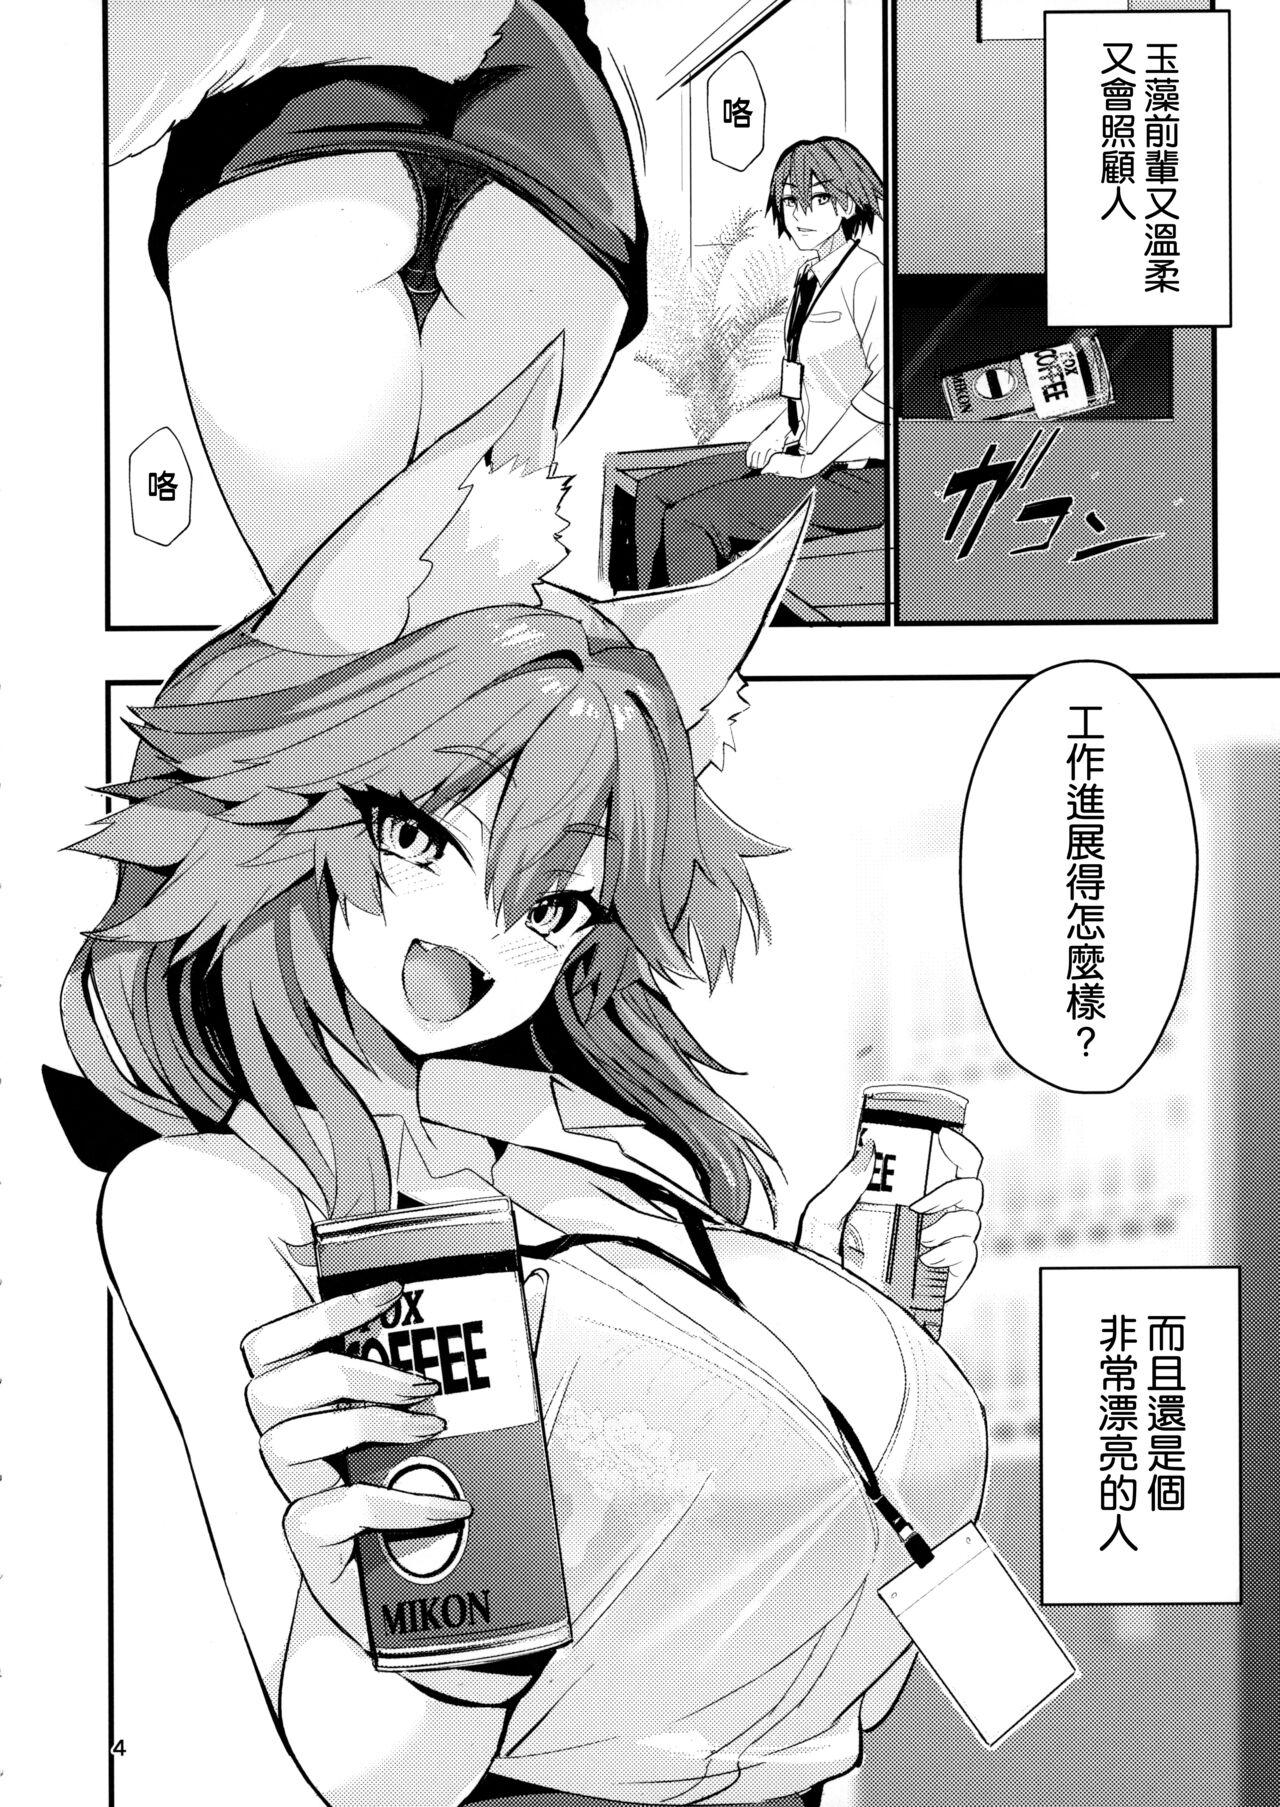 Blowjobs 先輩OLタマモさん - Fate extra Mature Woman - Page 4